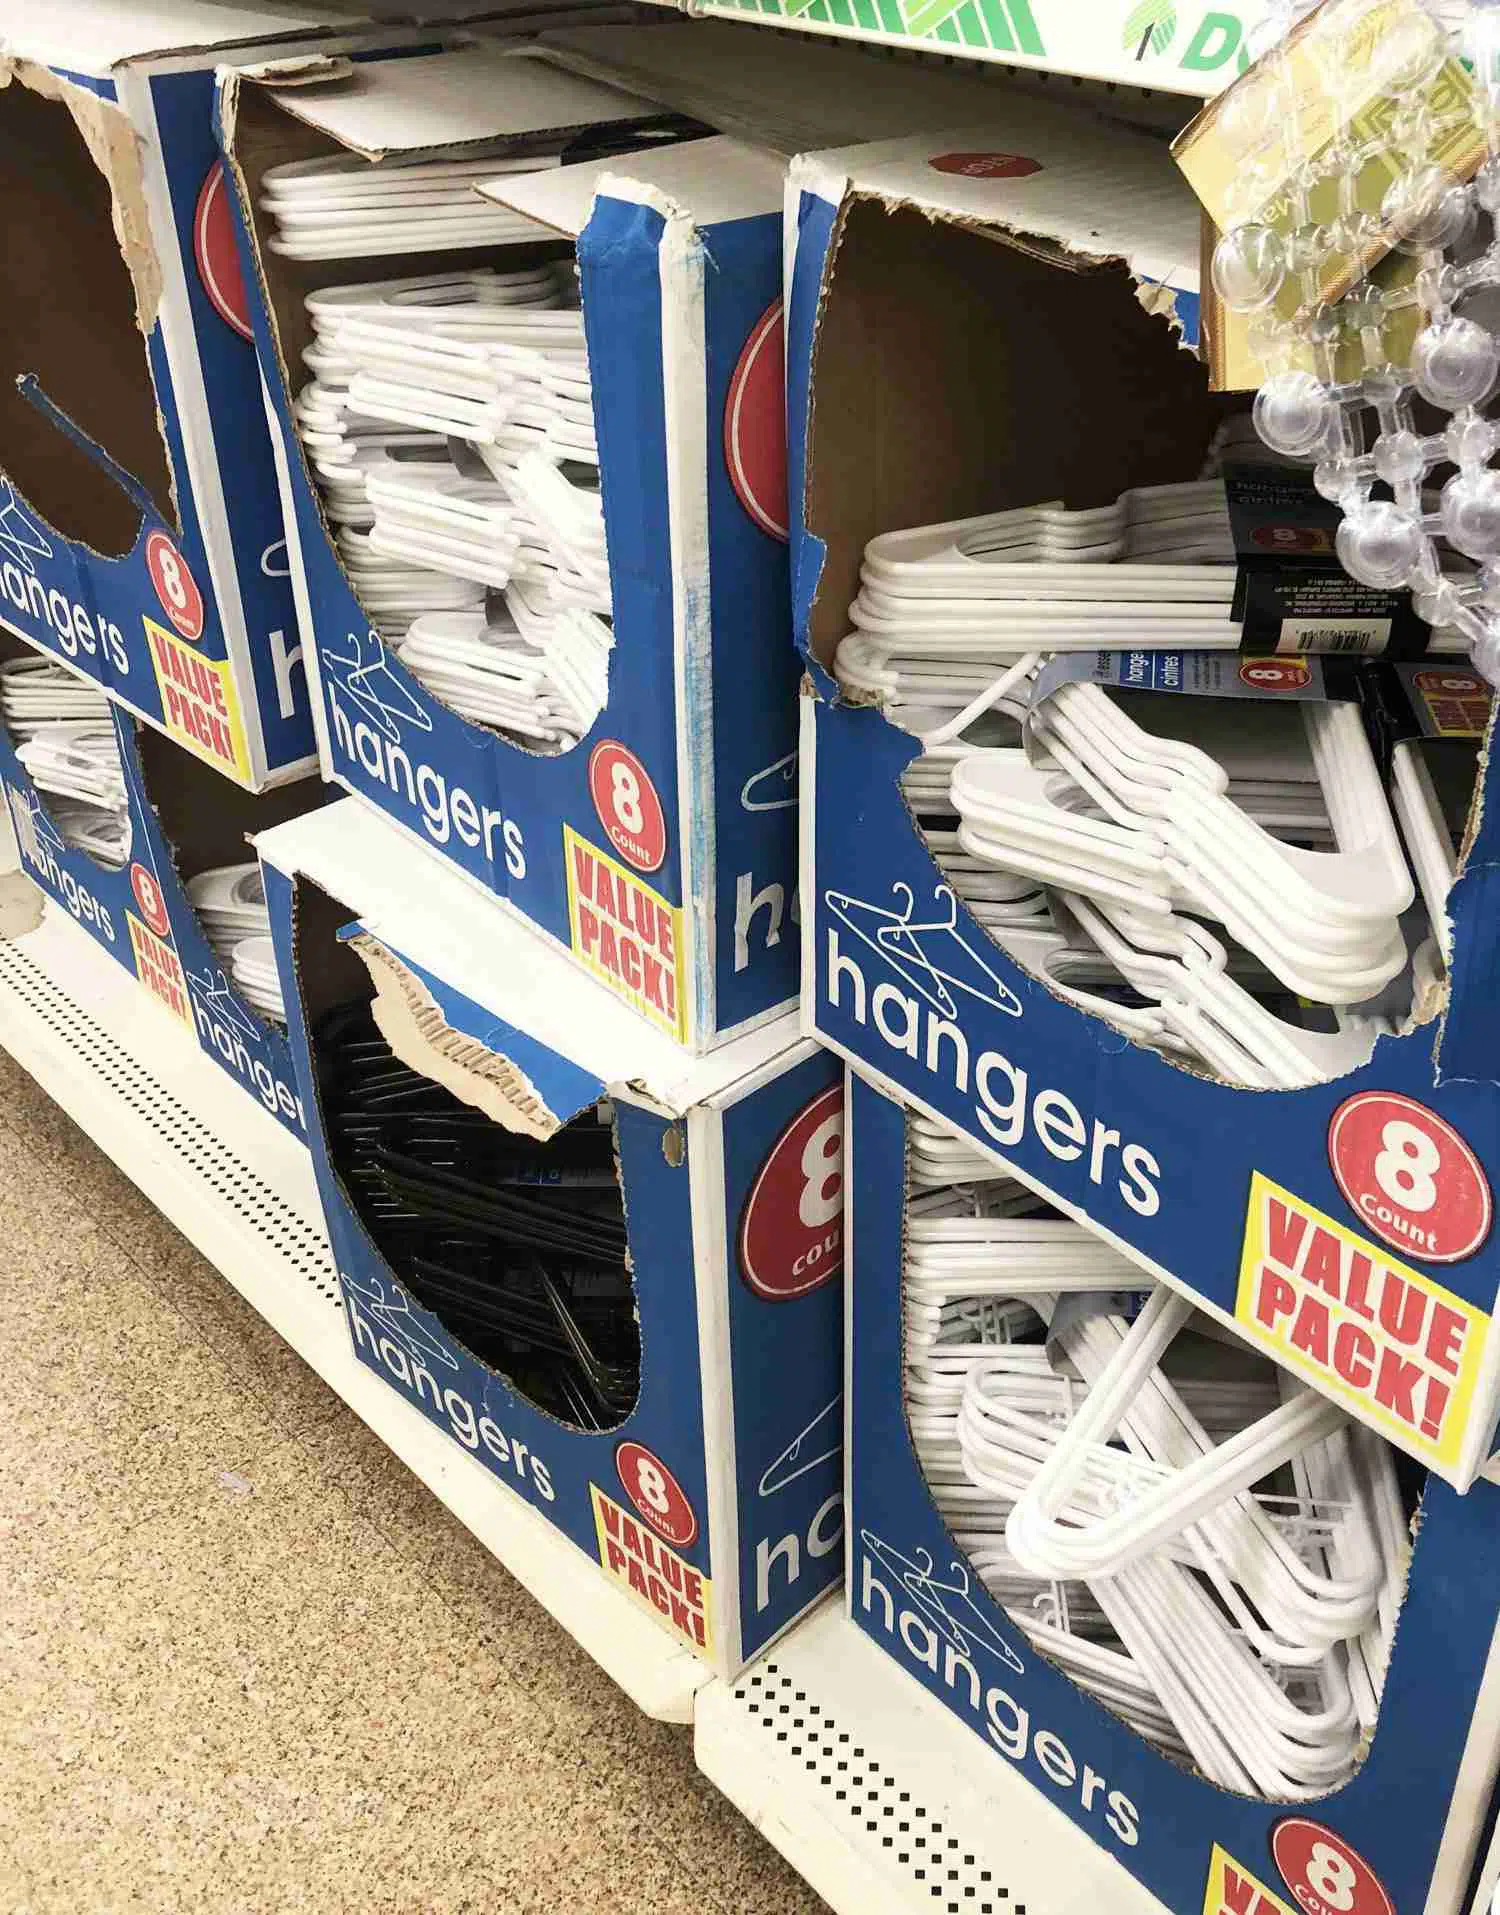 boxes of plastic hangers at a store.